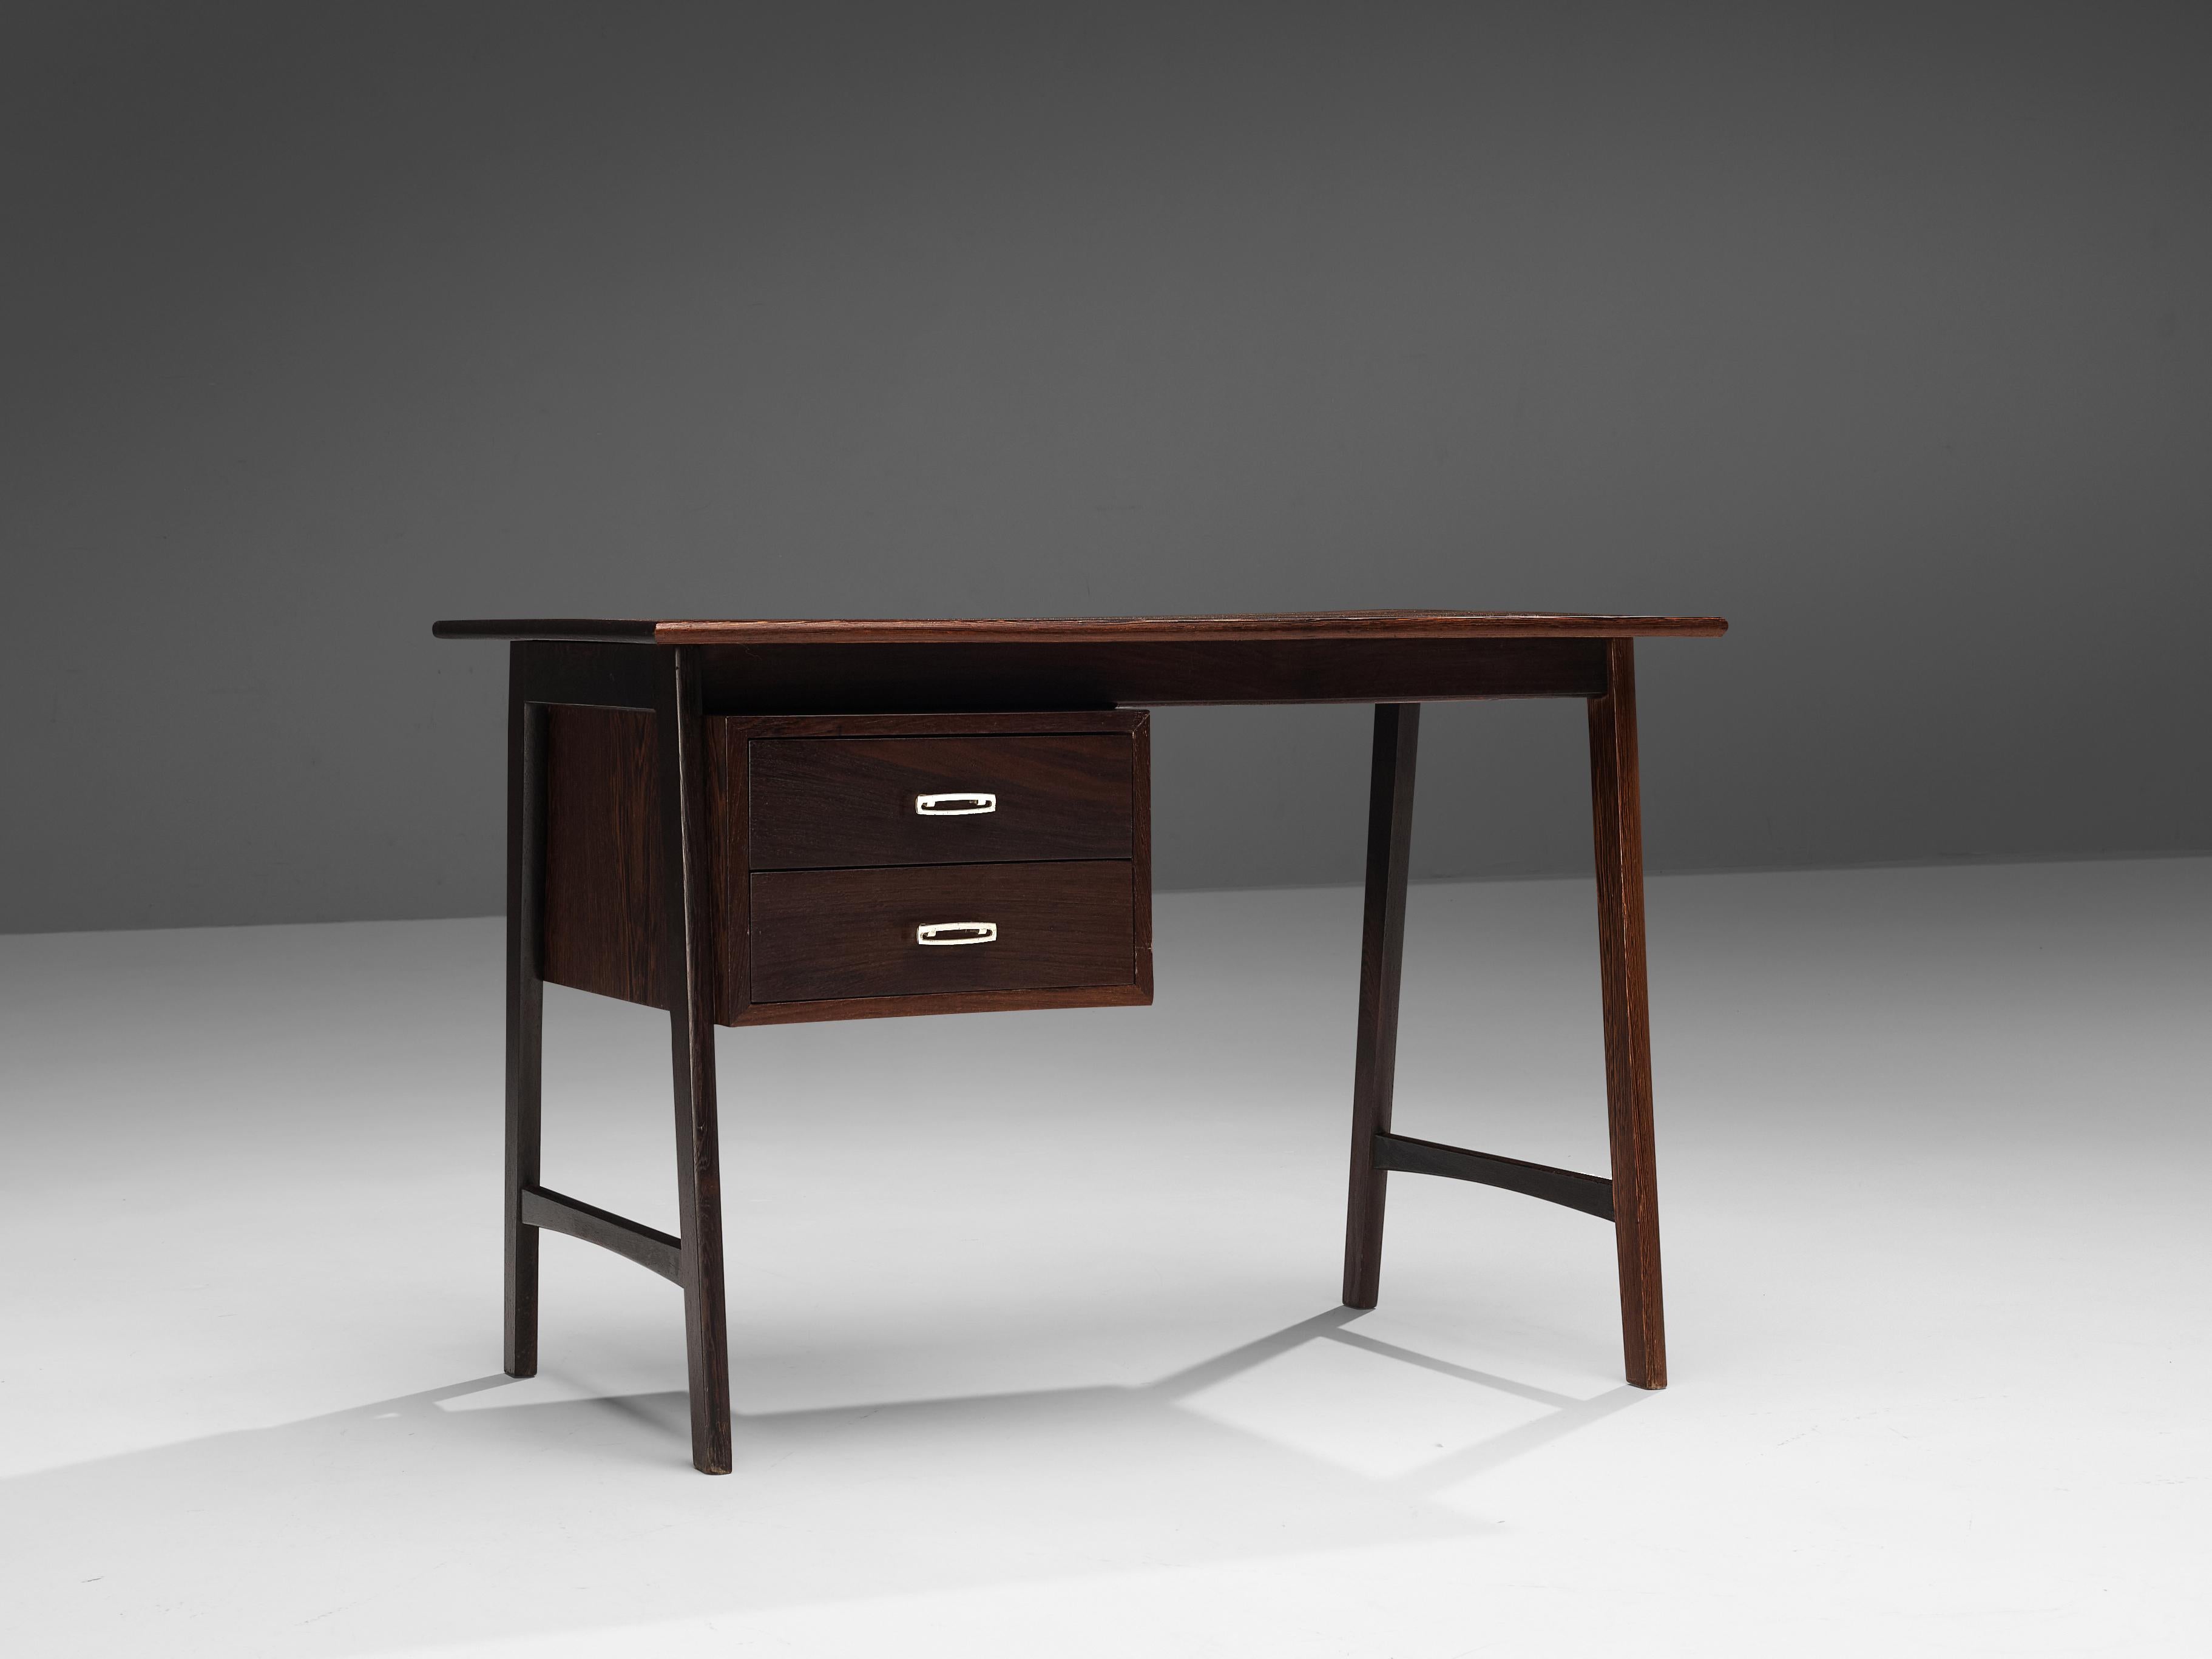 Writing desk with drawers, wengé, metal, Denmark, 1950s.

This fully restored small writing desk in expressive wengé is strong in its execution and modest in its design. The desk is executed with four legs that are connected via a horizontal beam. A